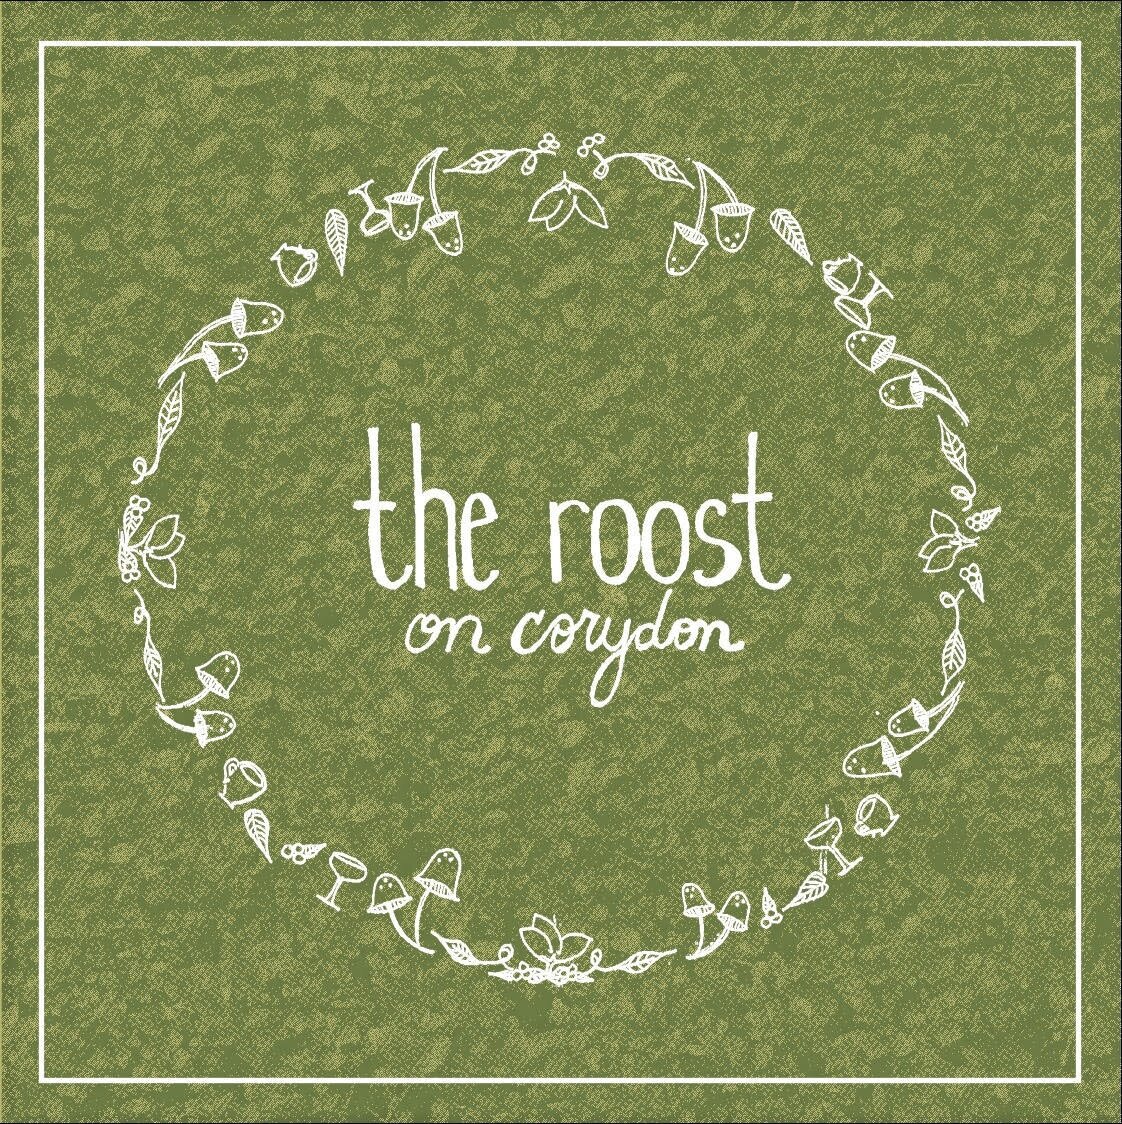 The Roost on Corydon